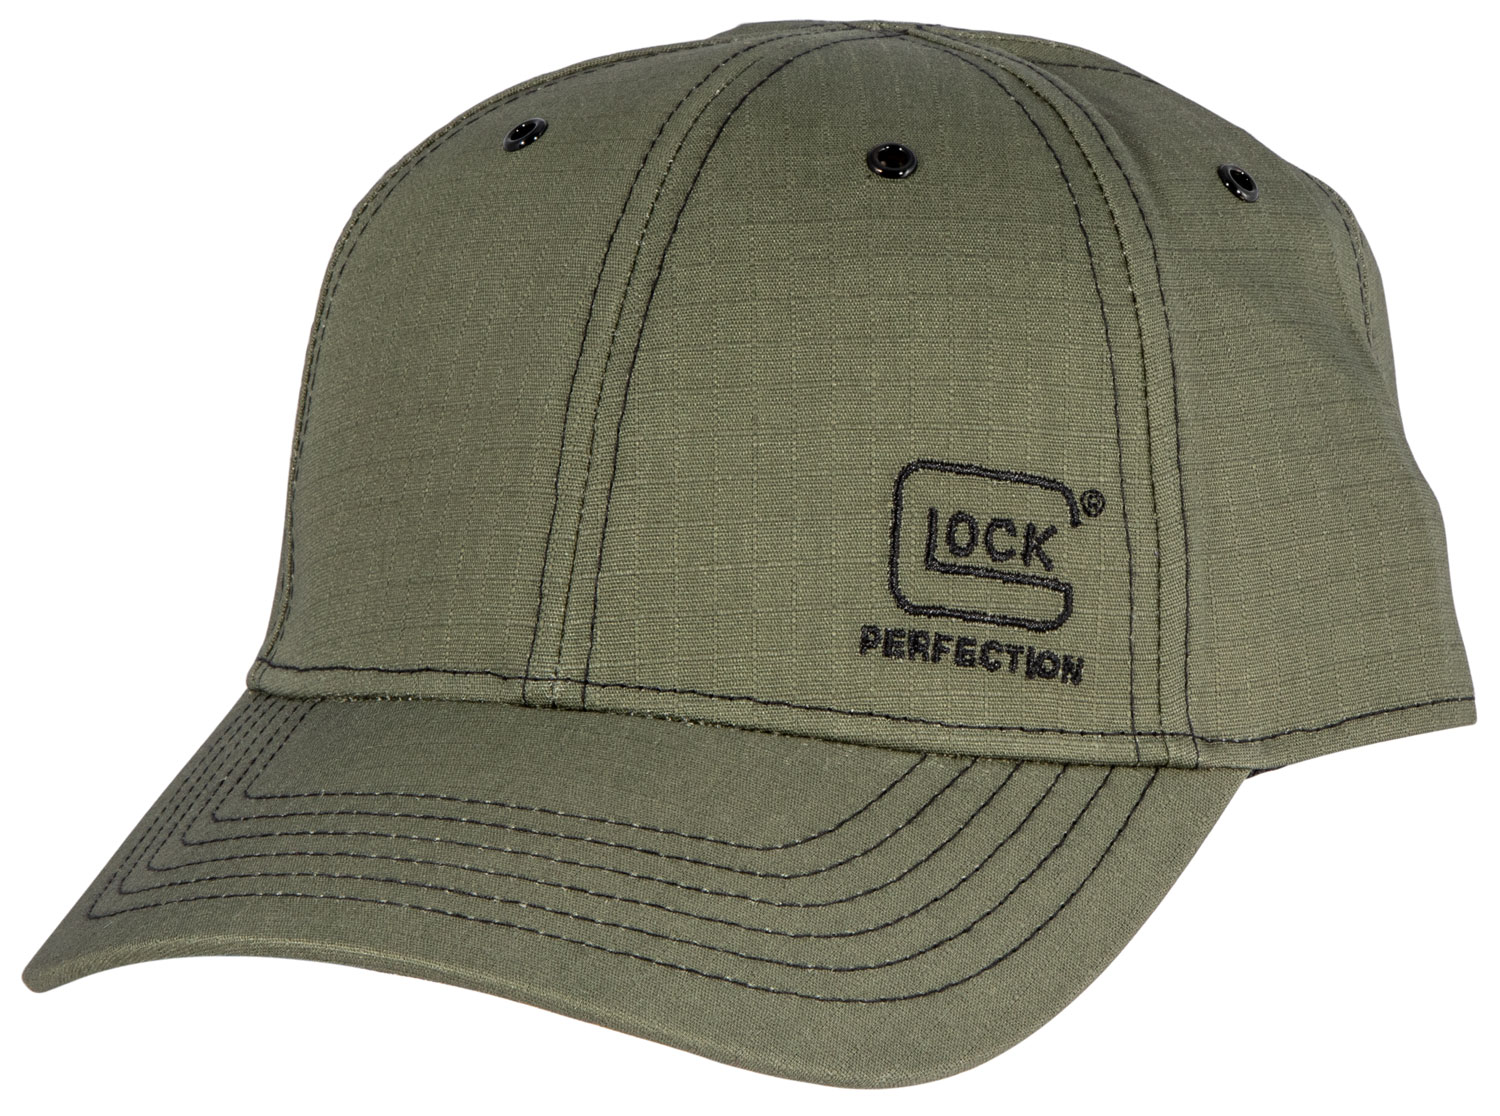 Glock AS10079 1986 Ripstop  Olive